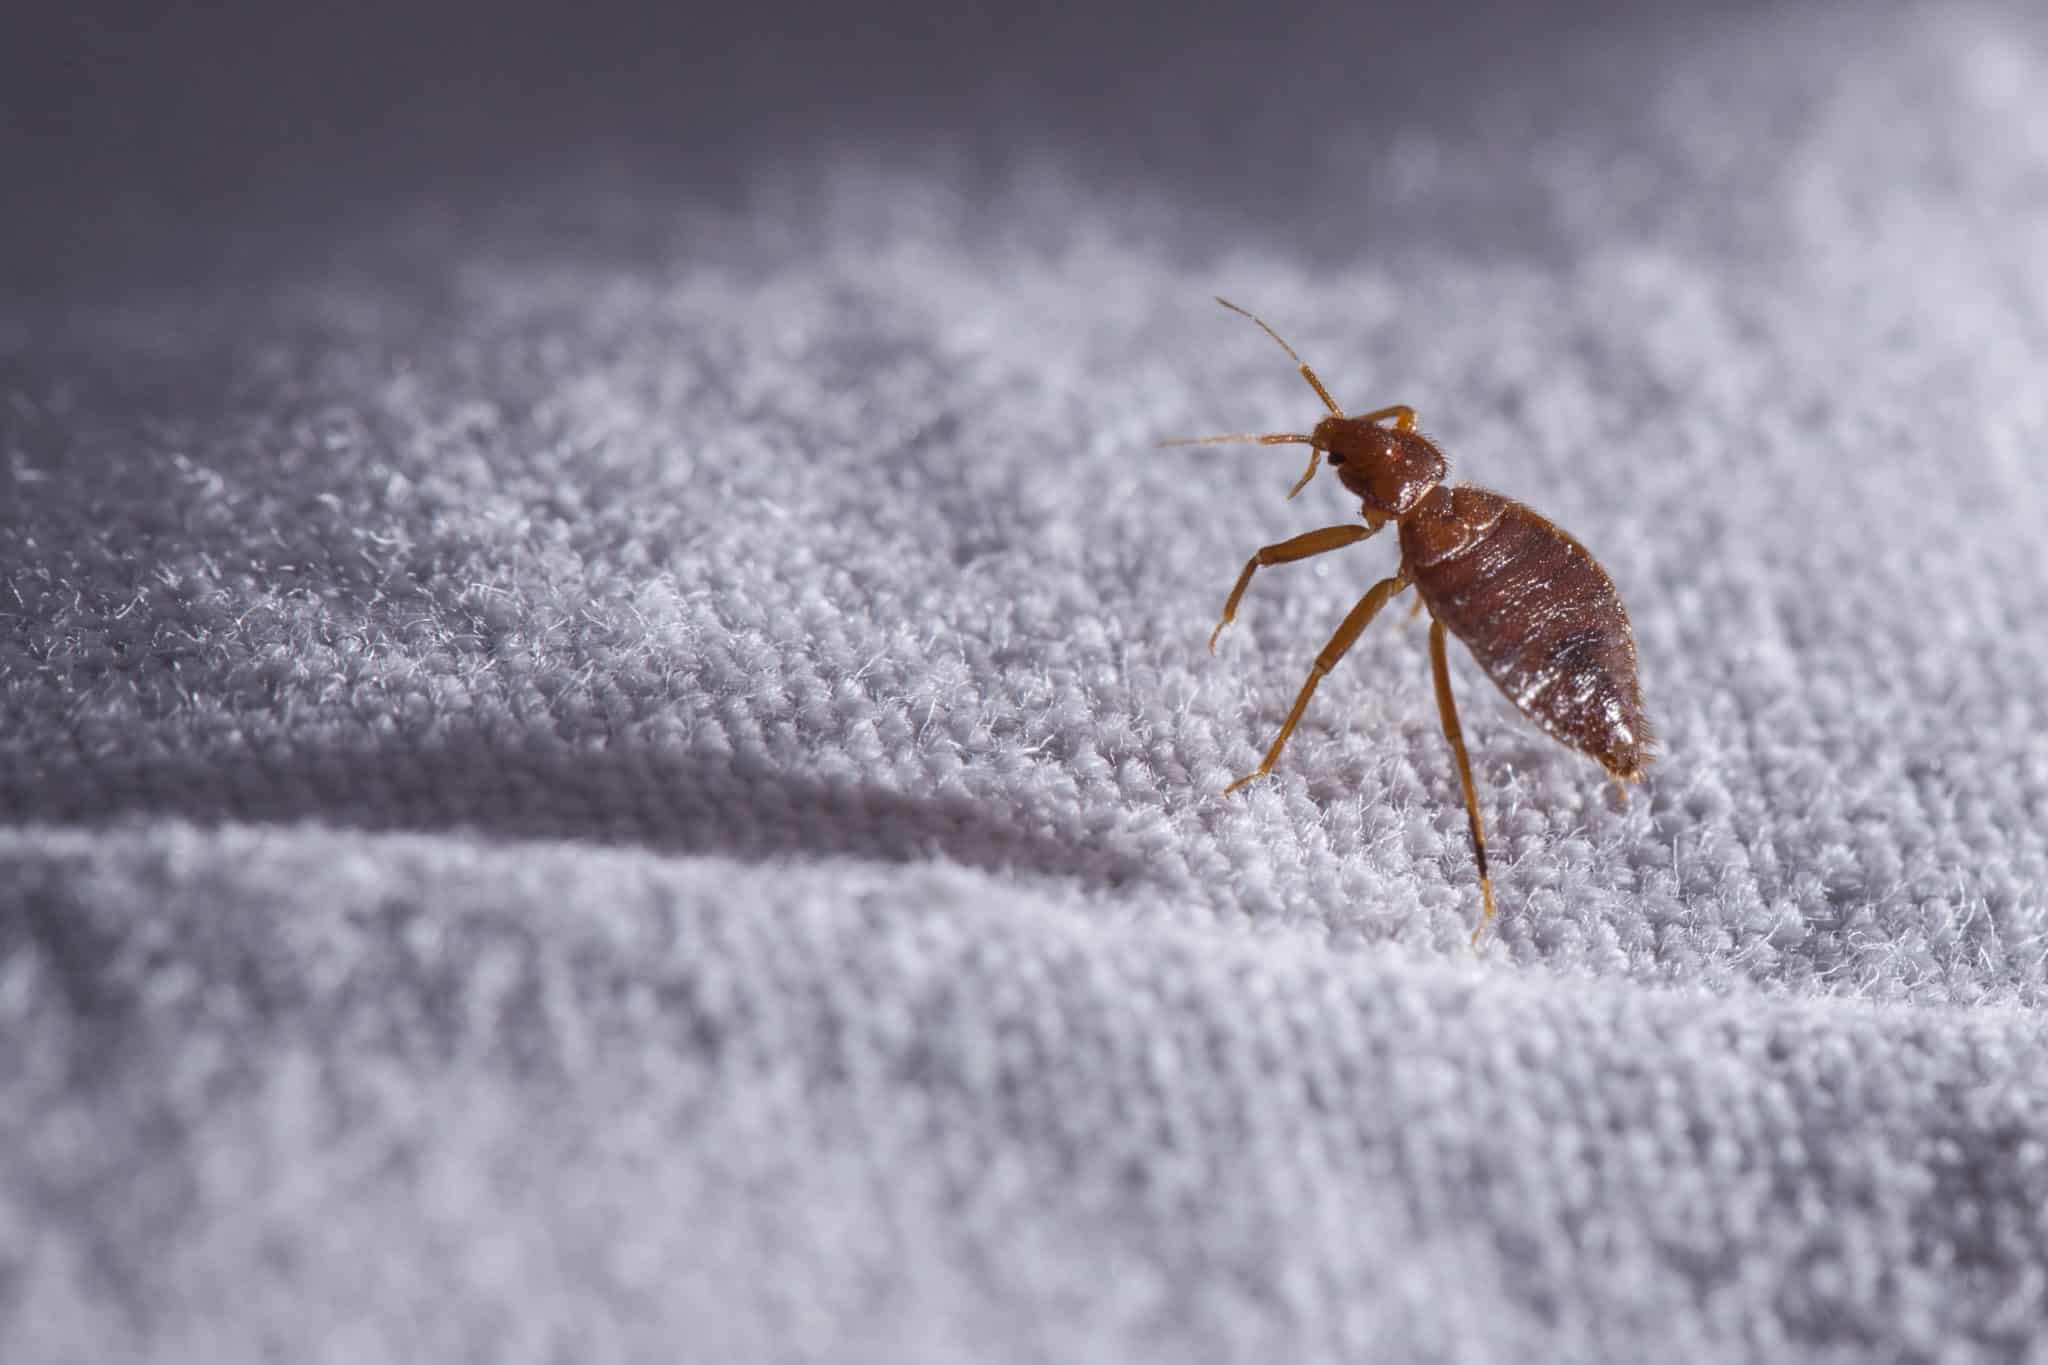 Bed bugs are a pest in hotels